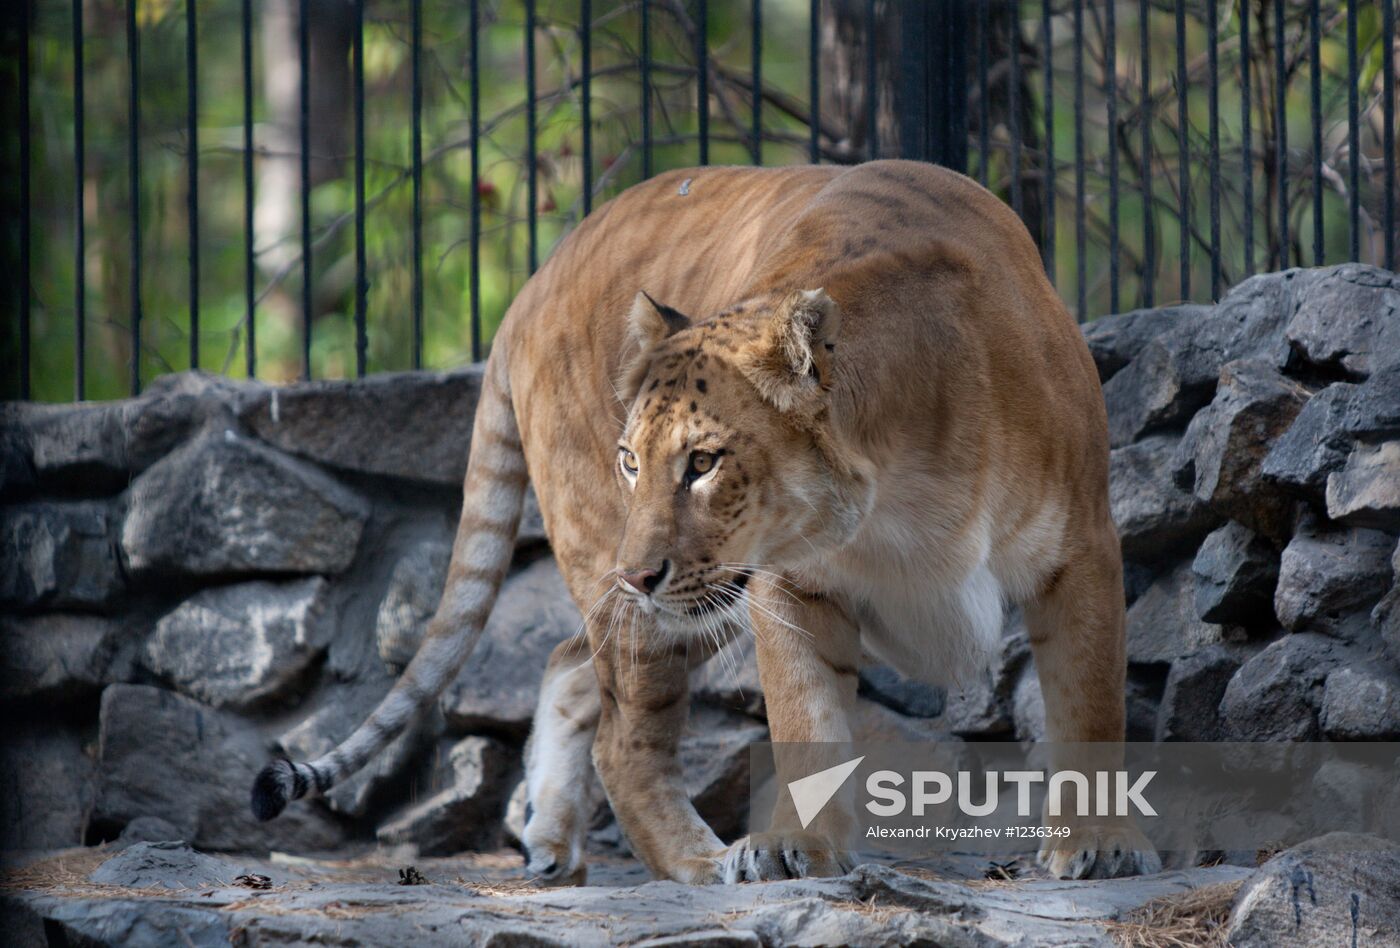 A hybrid cross between ligress and lion born in Novosibirsk Zoo